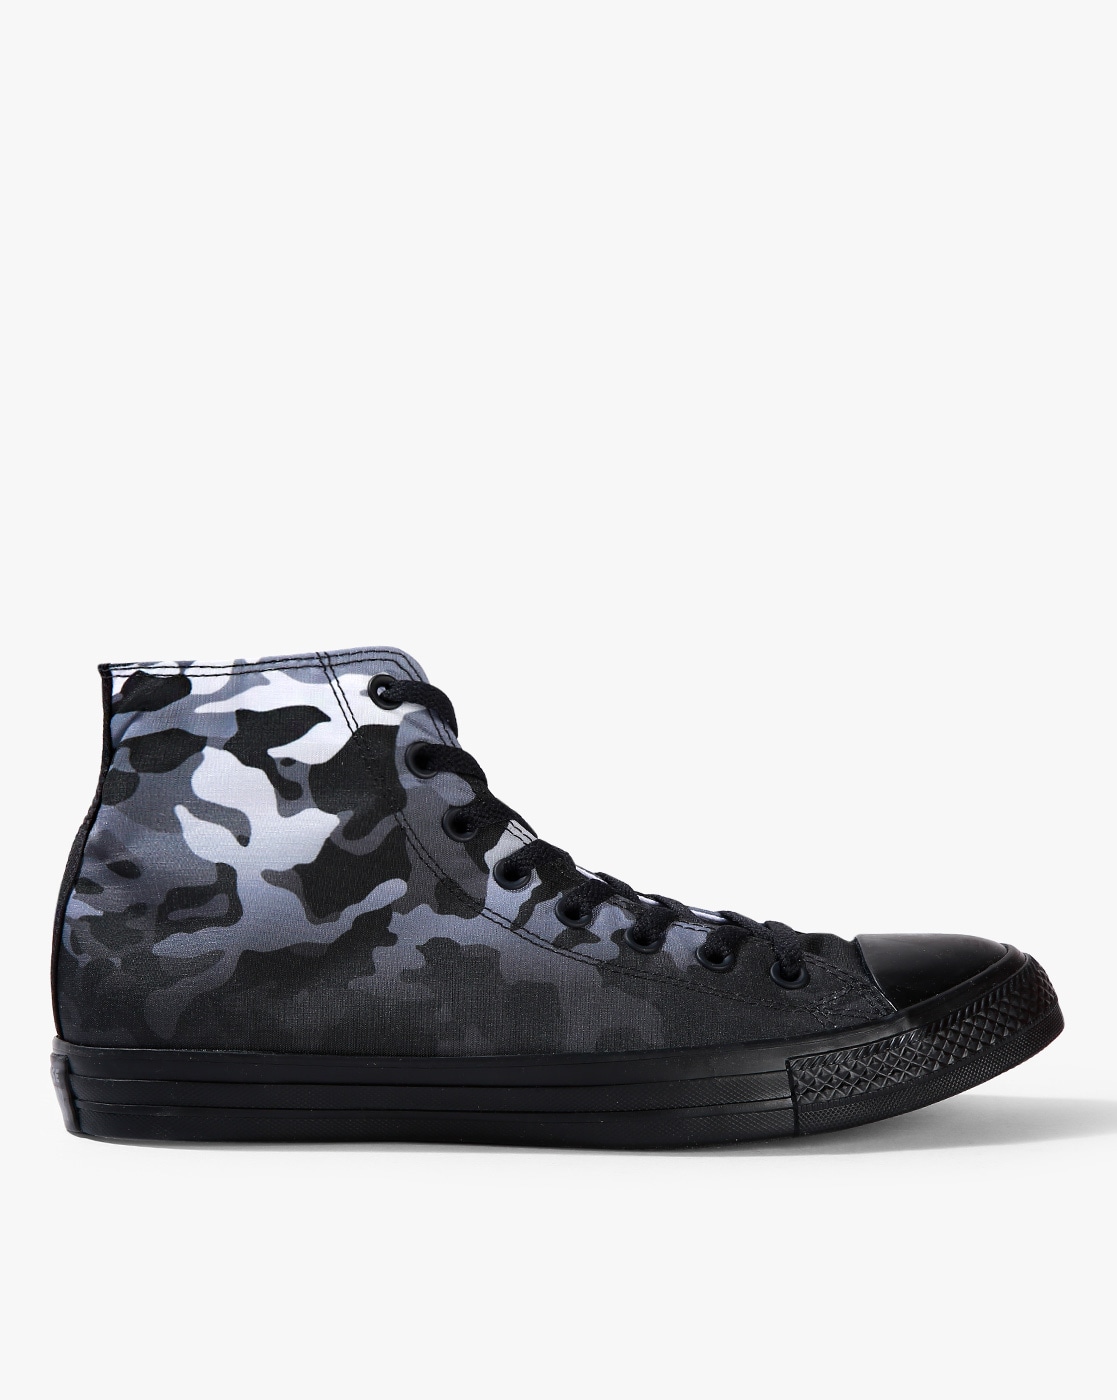 converse camouflage shoes